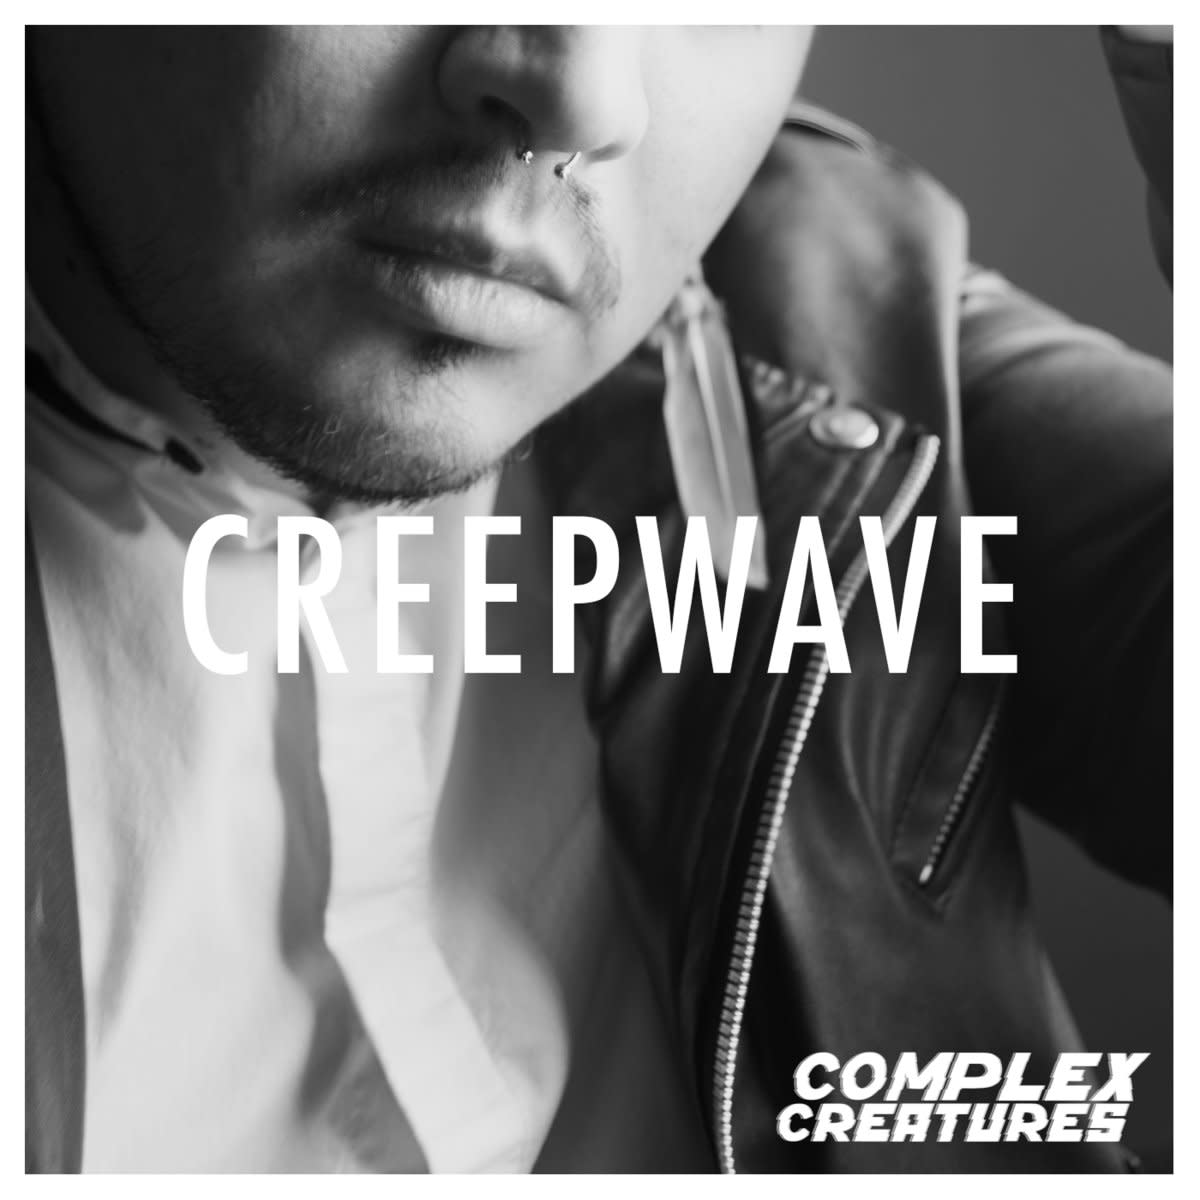 synth-single-review-creepwave-by-complex-creatures